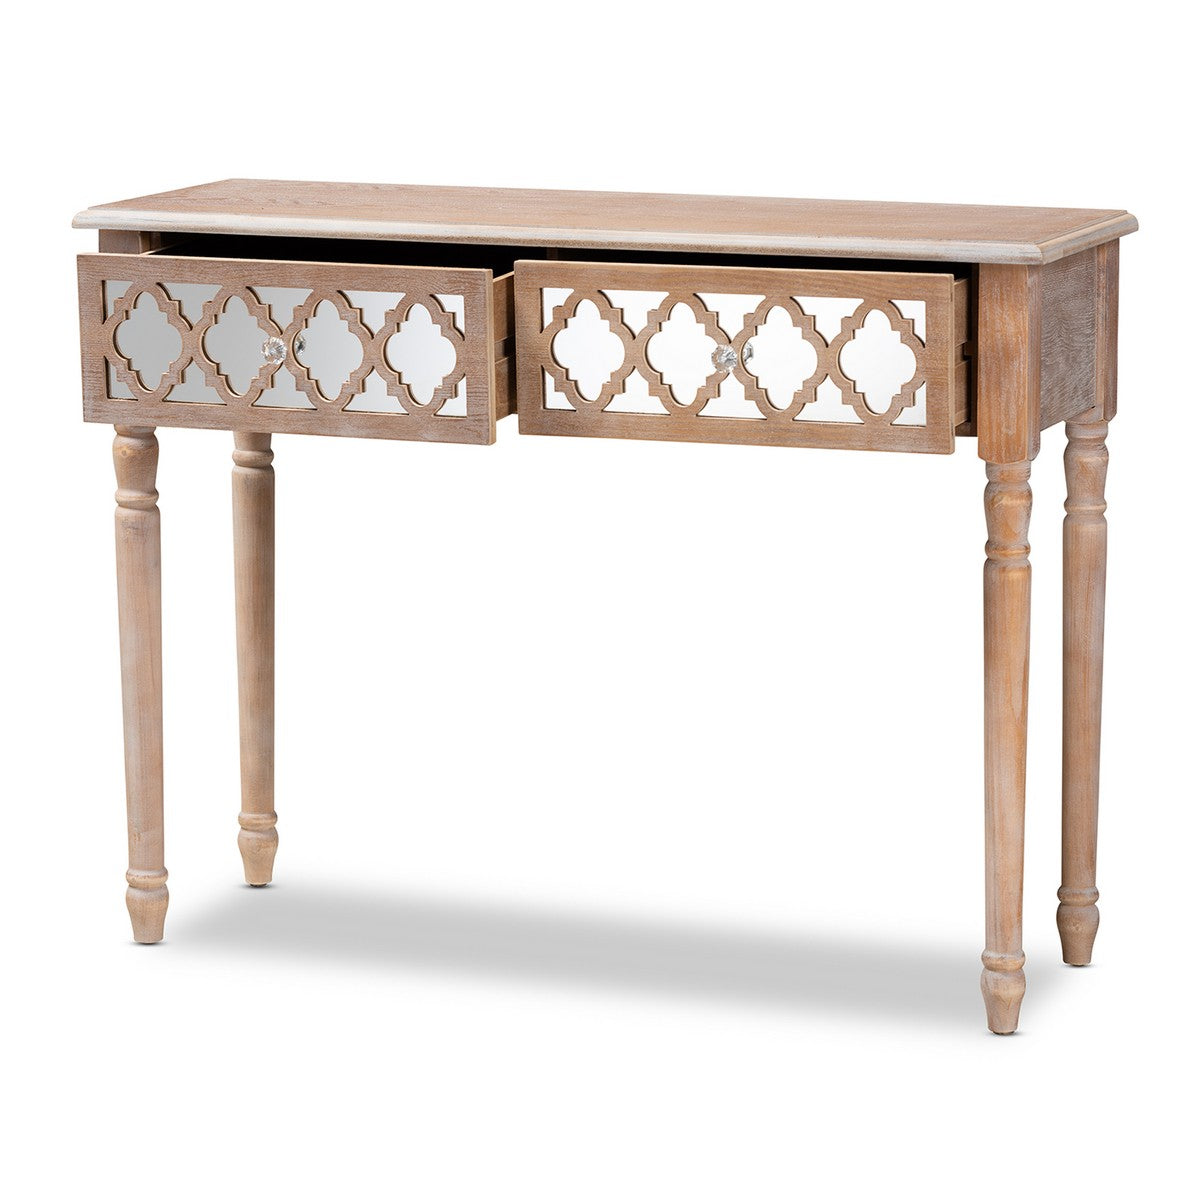 Baxton Studio Celia Transitional Rustic French Country White-Washed Wood and Mirror 2-Drawer Quatrefoil Console Table